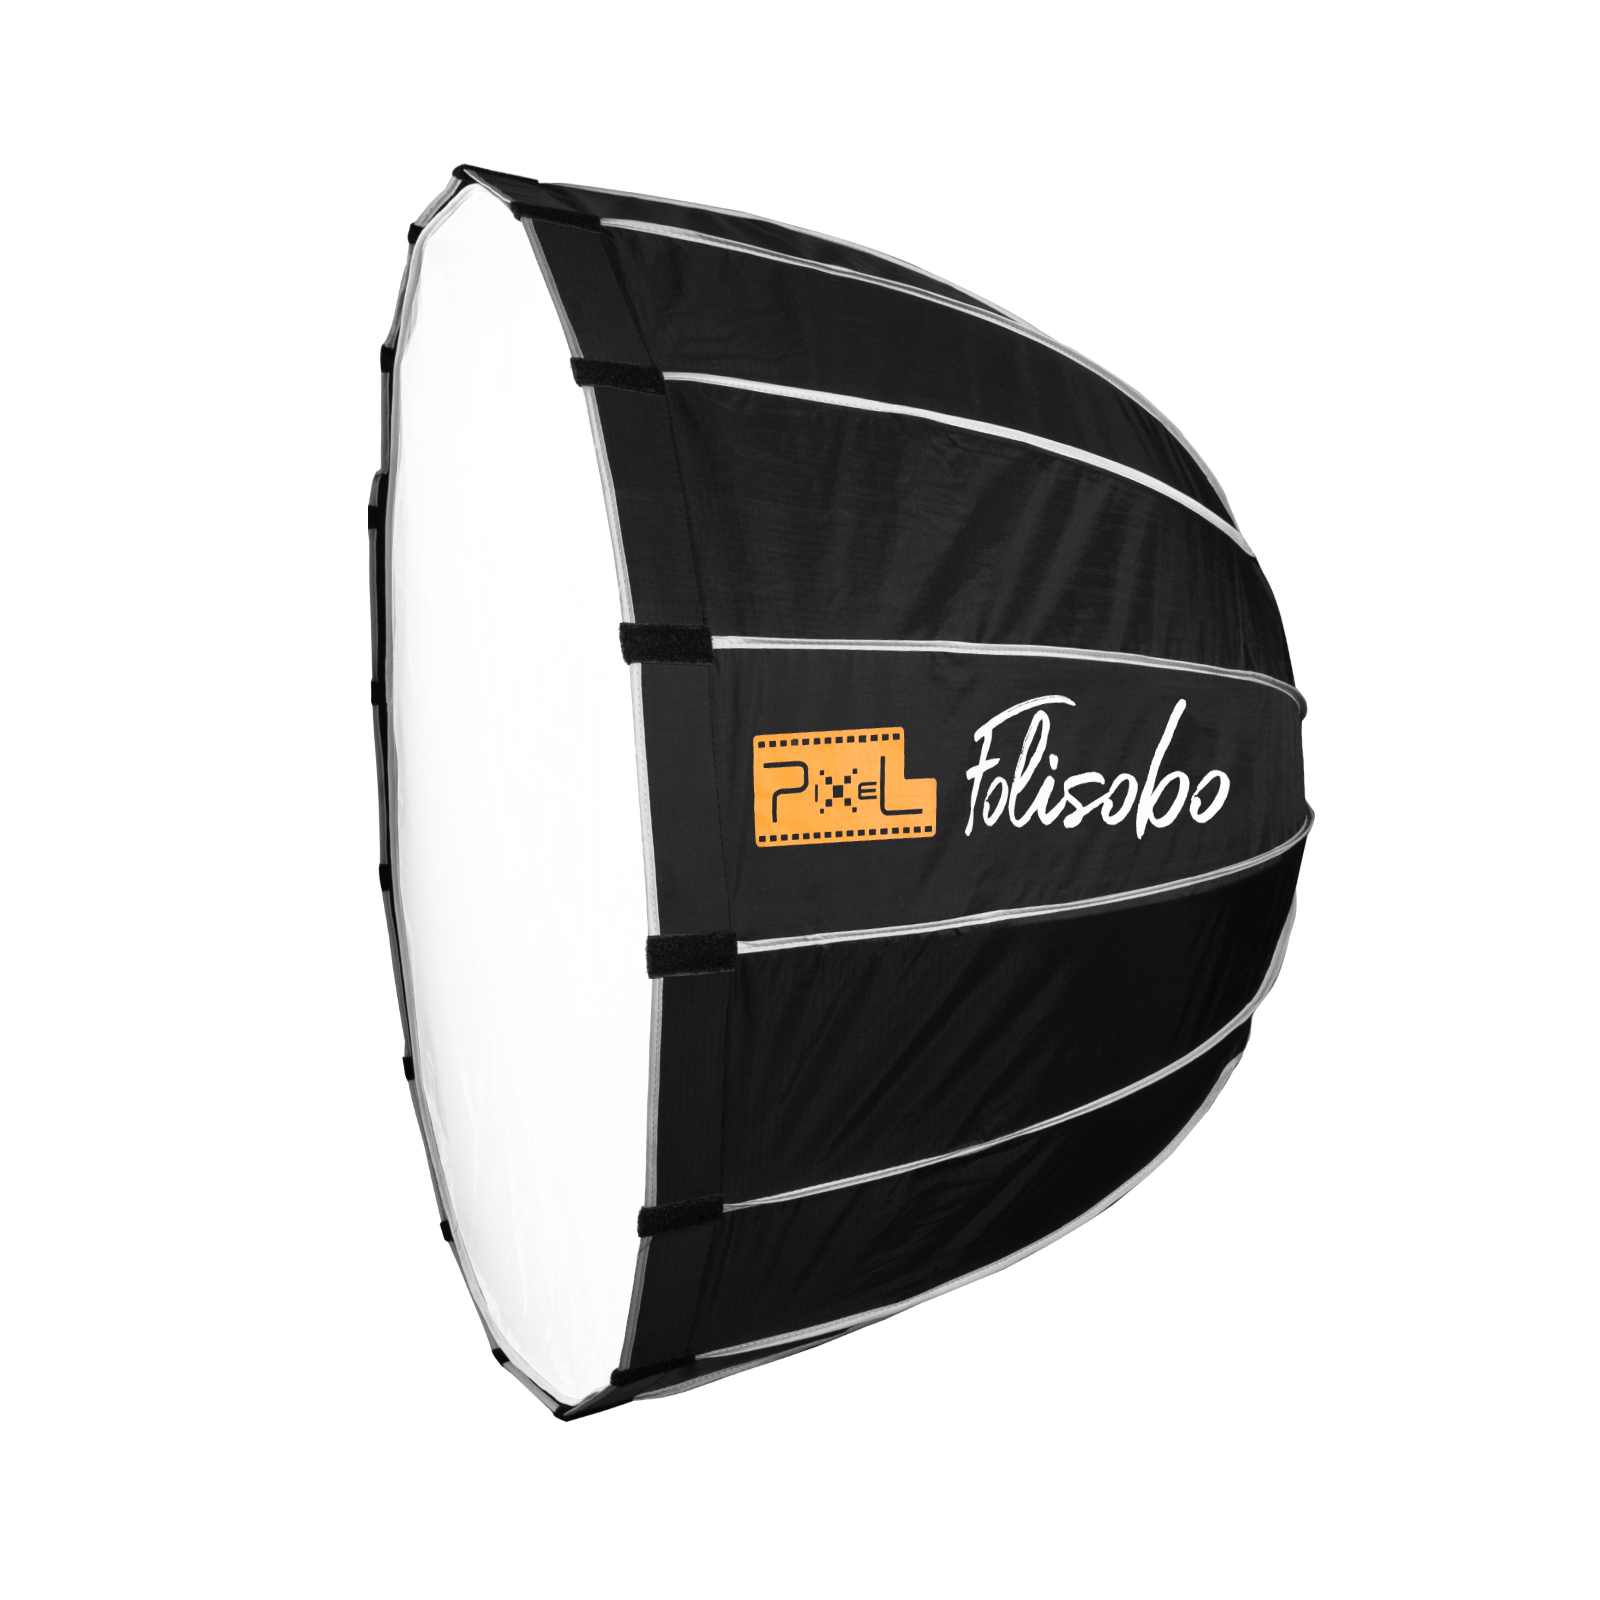 Pixel F60 LED Parabolic Softbox, soft light, delicate and even.